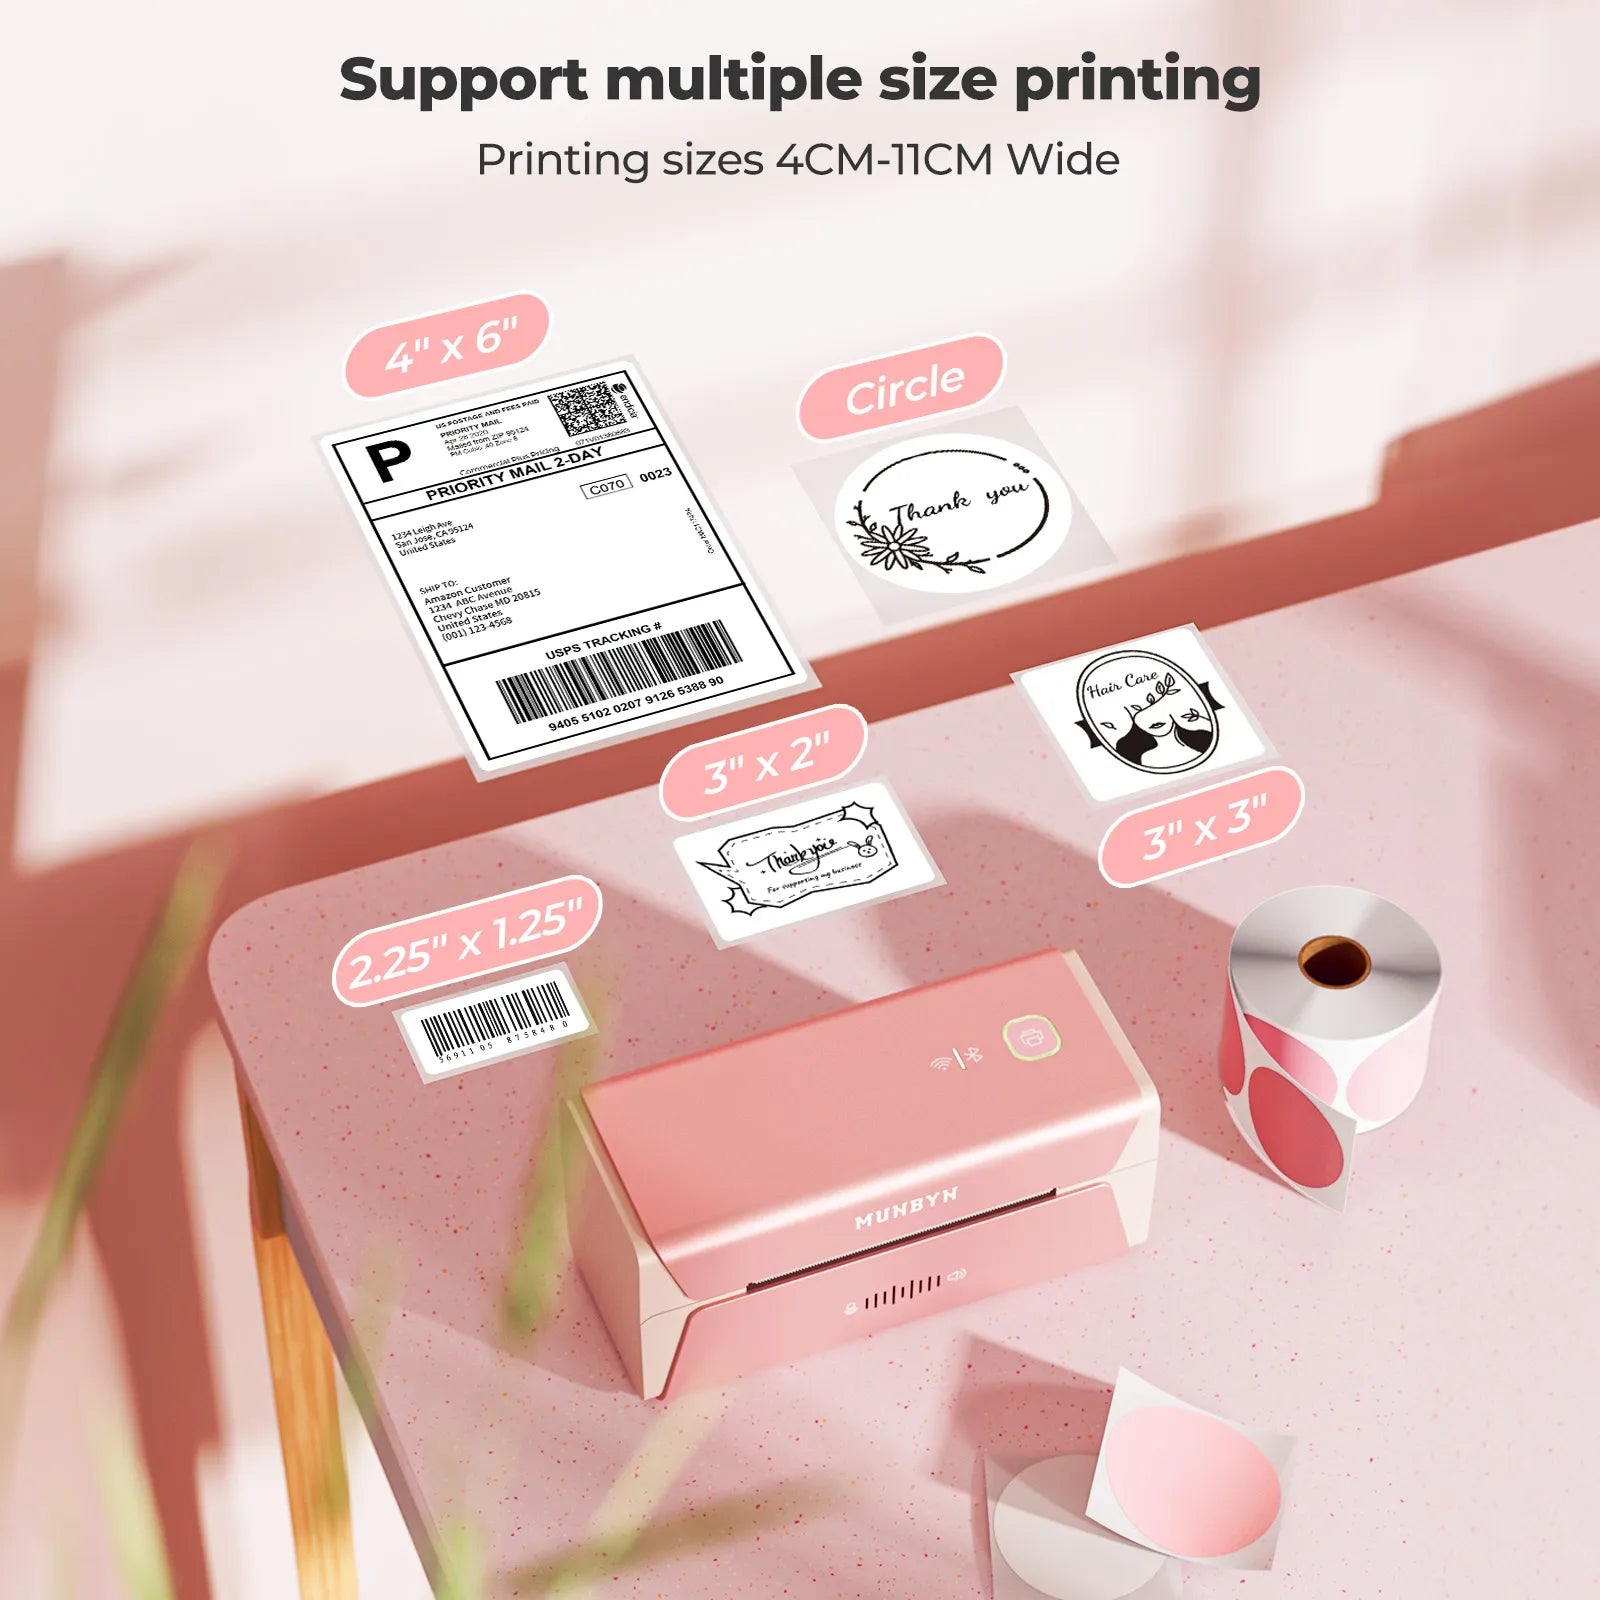 MUNBYN Voice Controlled Wireless Thermal Label Printer P44S is suitable for multi-size label printing.